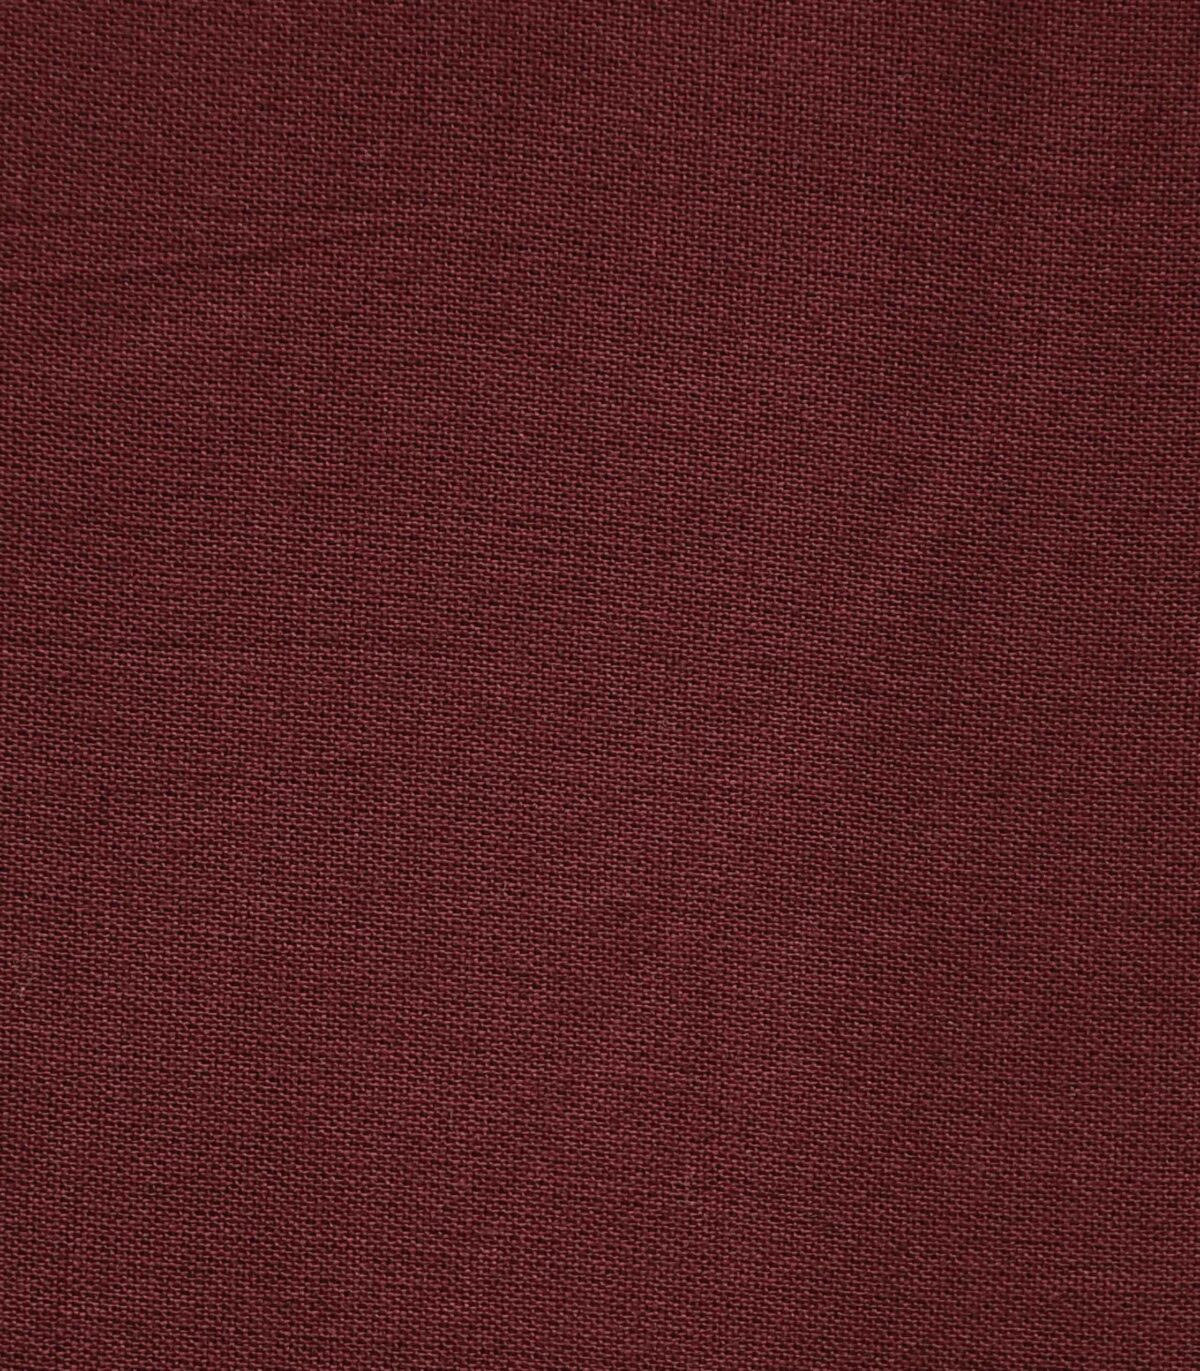 Viscose Maroon Color Dyed Woven Fabric